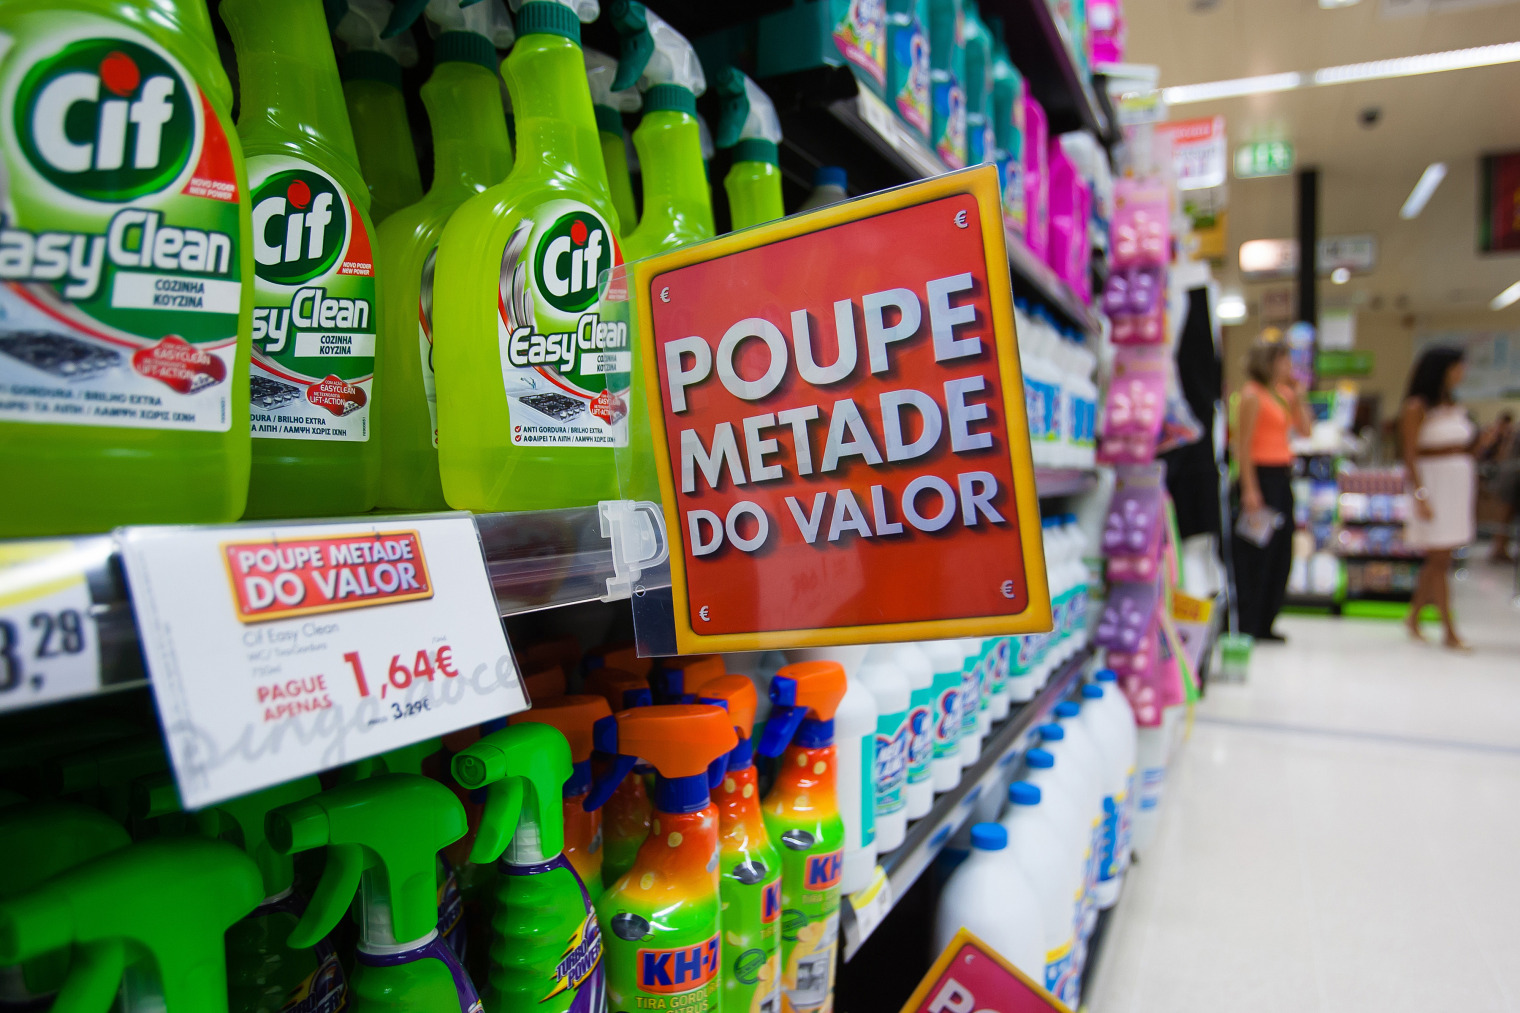 Cif cleaning products sit for sale inside a supermarket&nbsp;in Lisbon.